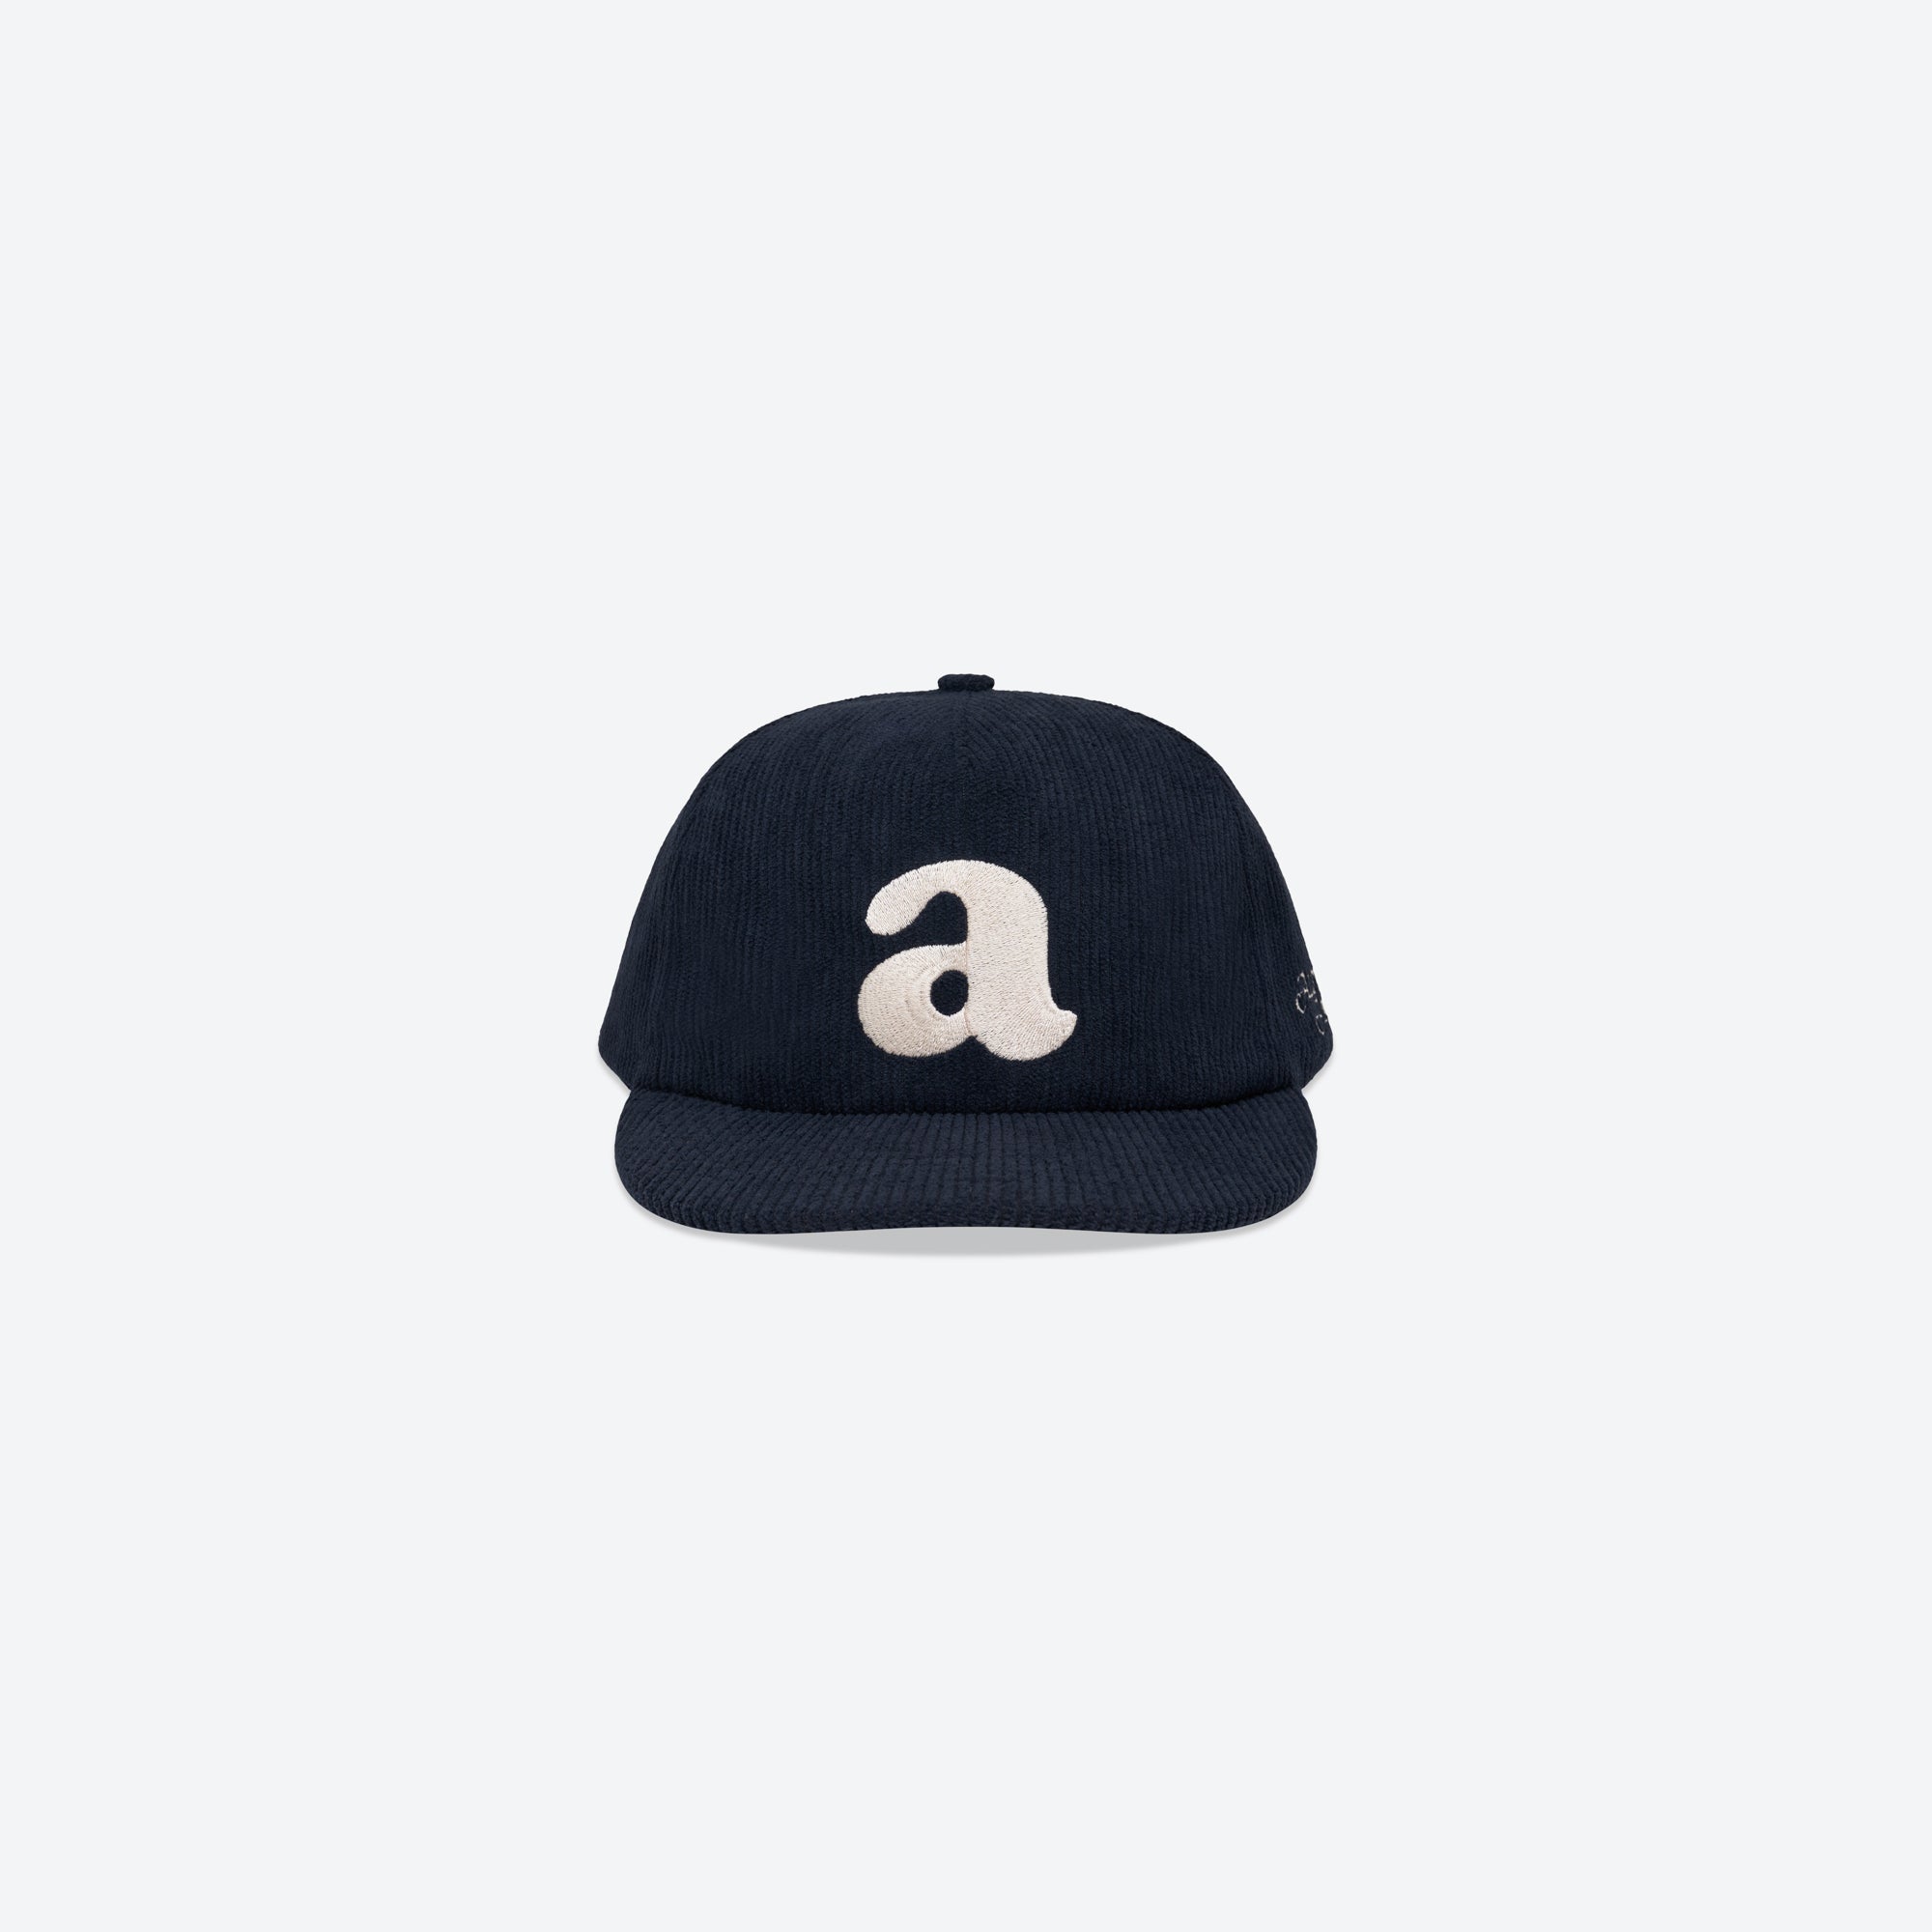 Alfred's Apartment - Stamp Cord OG Cap - Navy